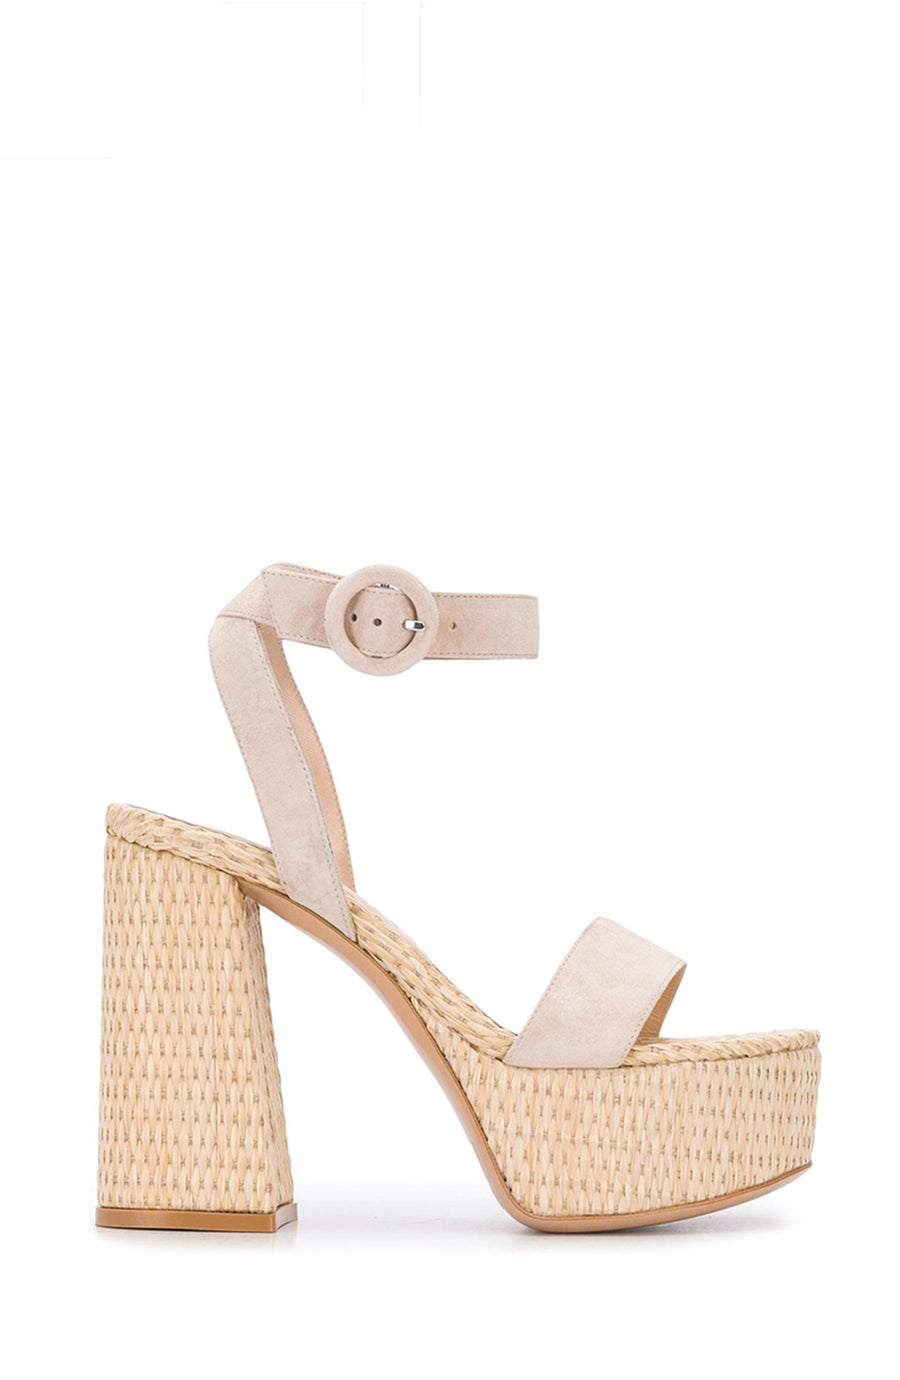 The 'Zandra' here features a raffia platform sole, paired with soft neutral suede. The maxi platform block heel has an ever-so-slight flare to its shape, that holds tribute to iconic 1970's fashion. 